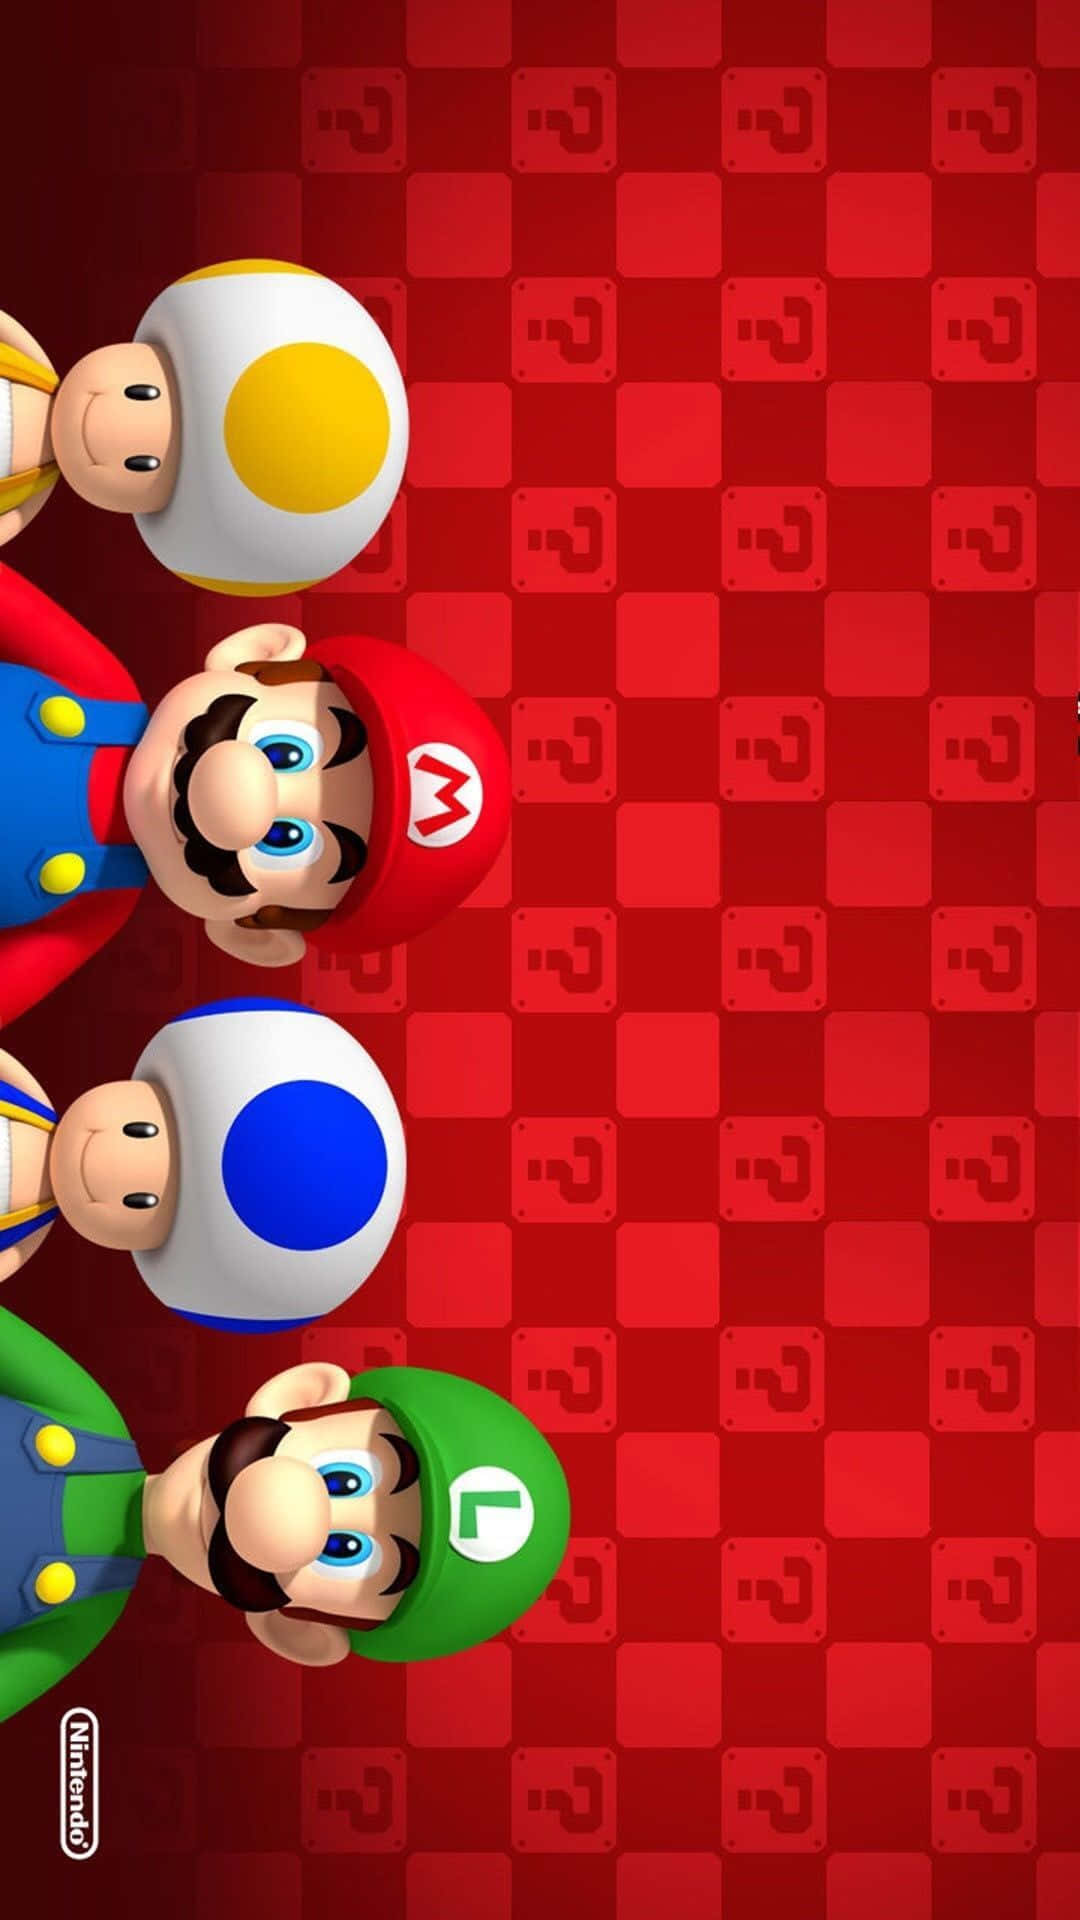 Unlock a world of possibilities with the new Super Mario iPhone! Wallpaper